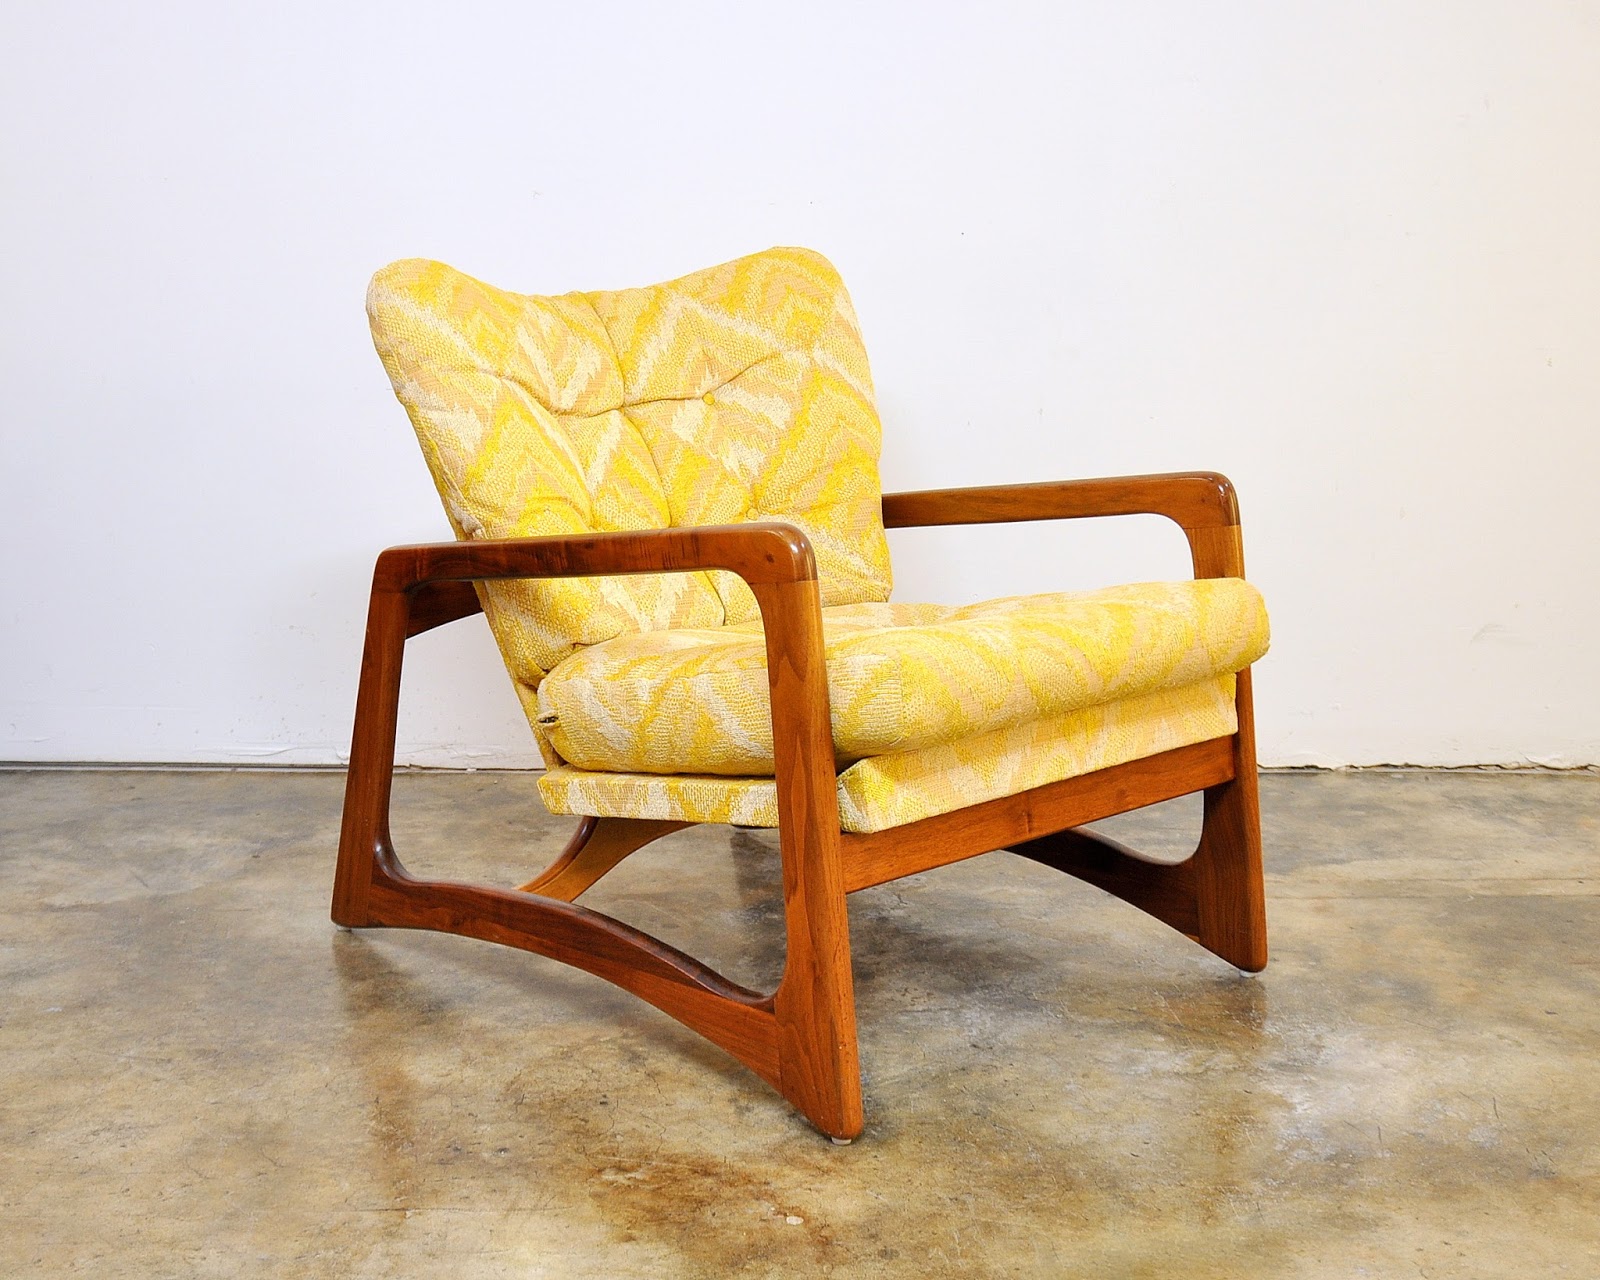 Adrian Pearsall Mid Century Dining Room Chairs